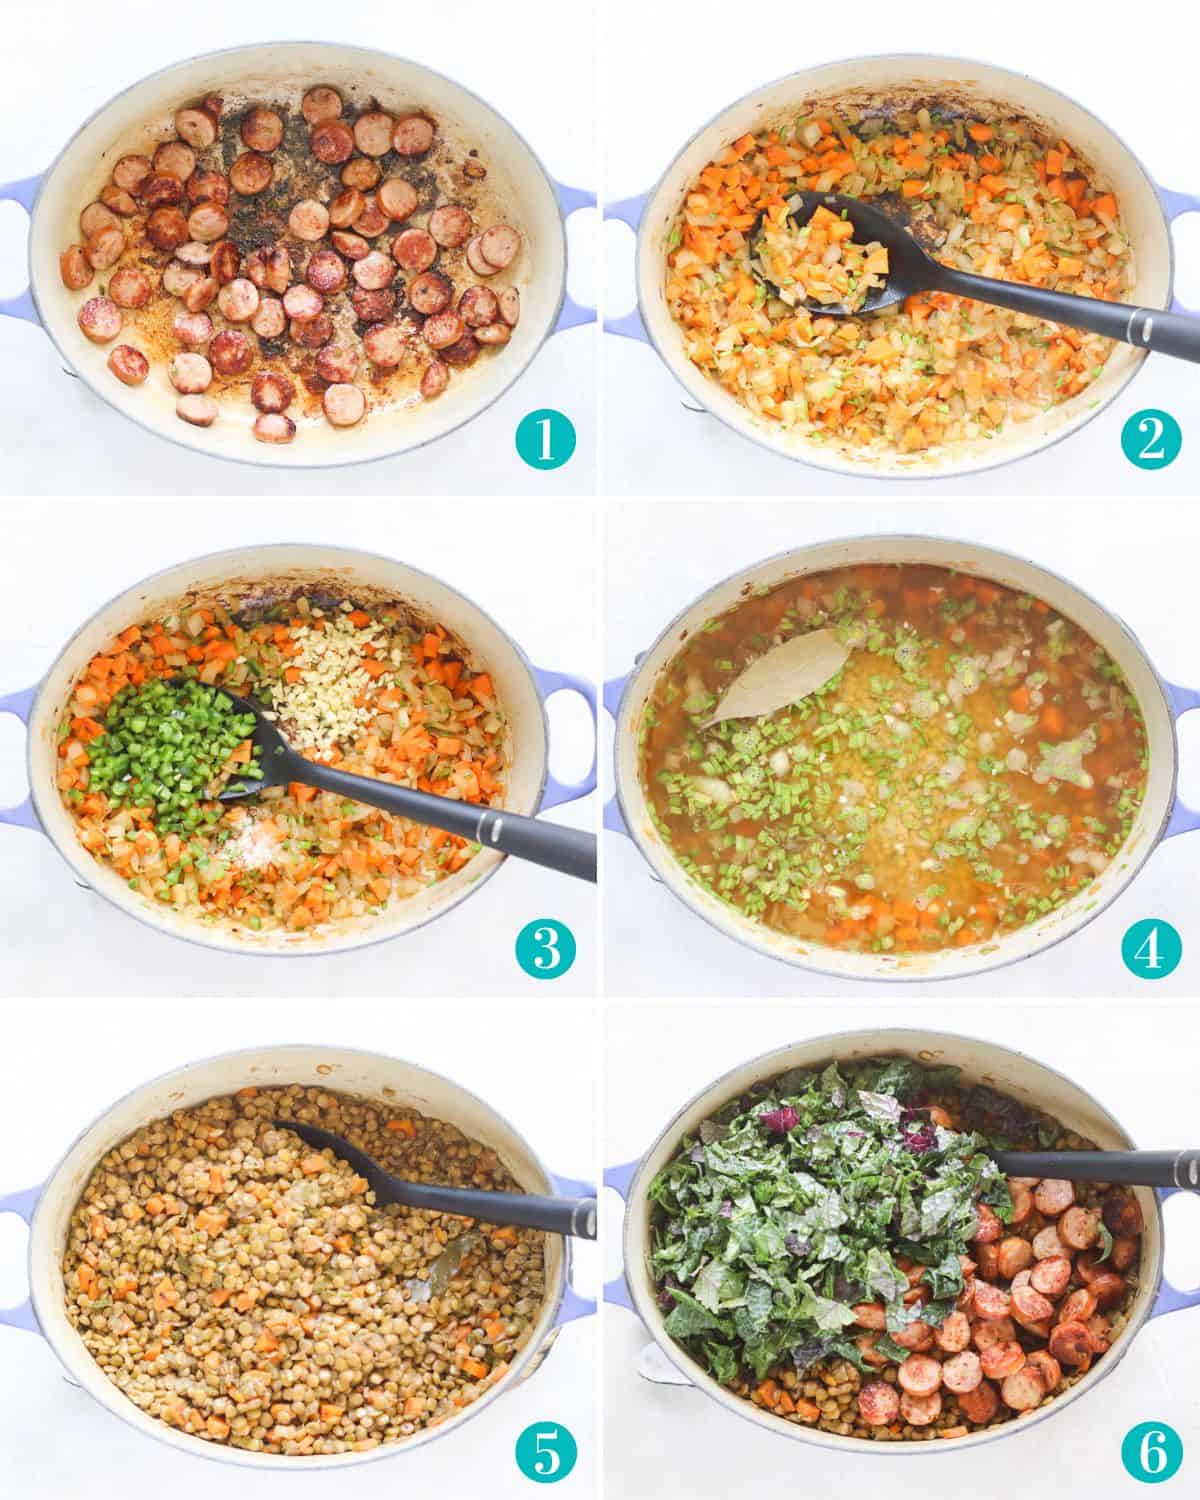 six photo collage with sausage cooking in blue dutch oven, veggies sauteing in blue pot, jalapenos and garlic added to pot, lentils and water added to pot, lentils in pot after cooking, kale and sausage in pot of lentils.